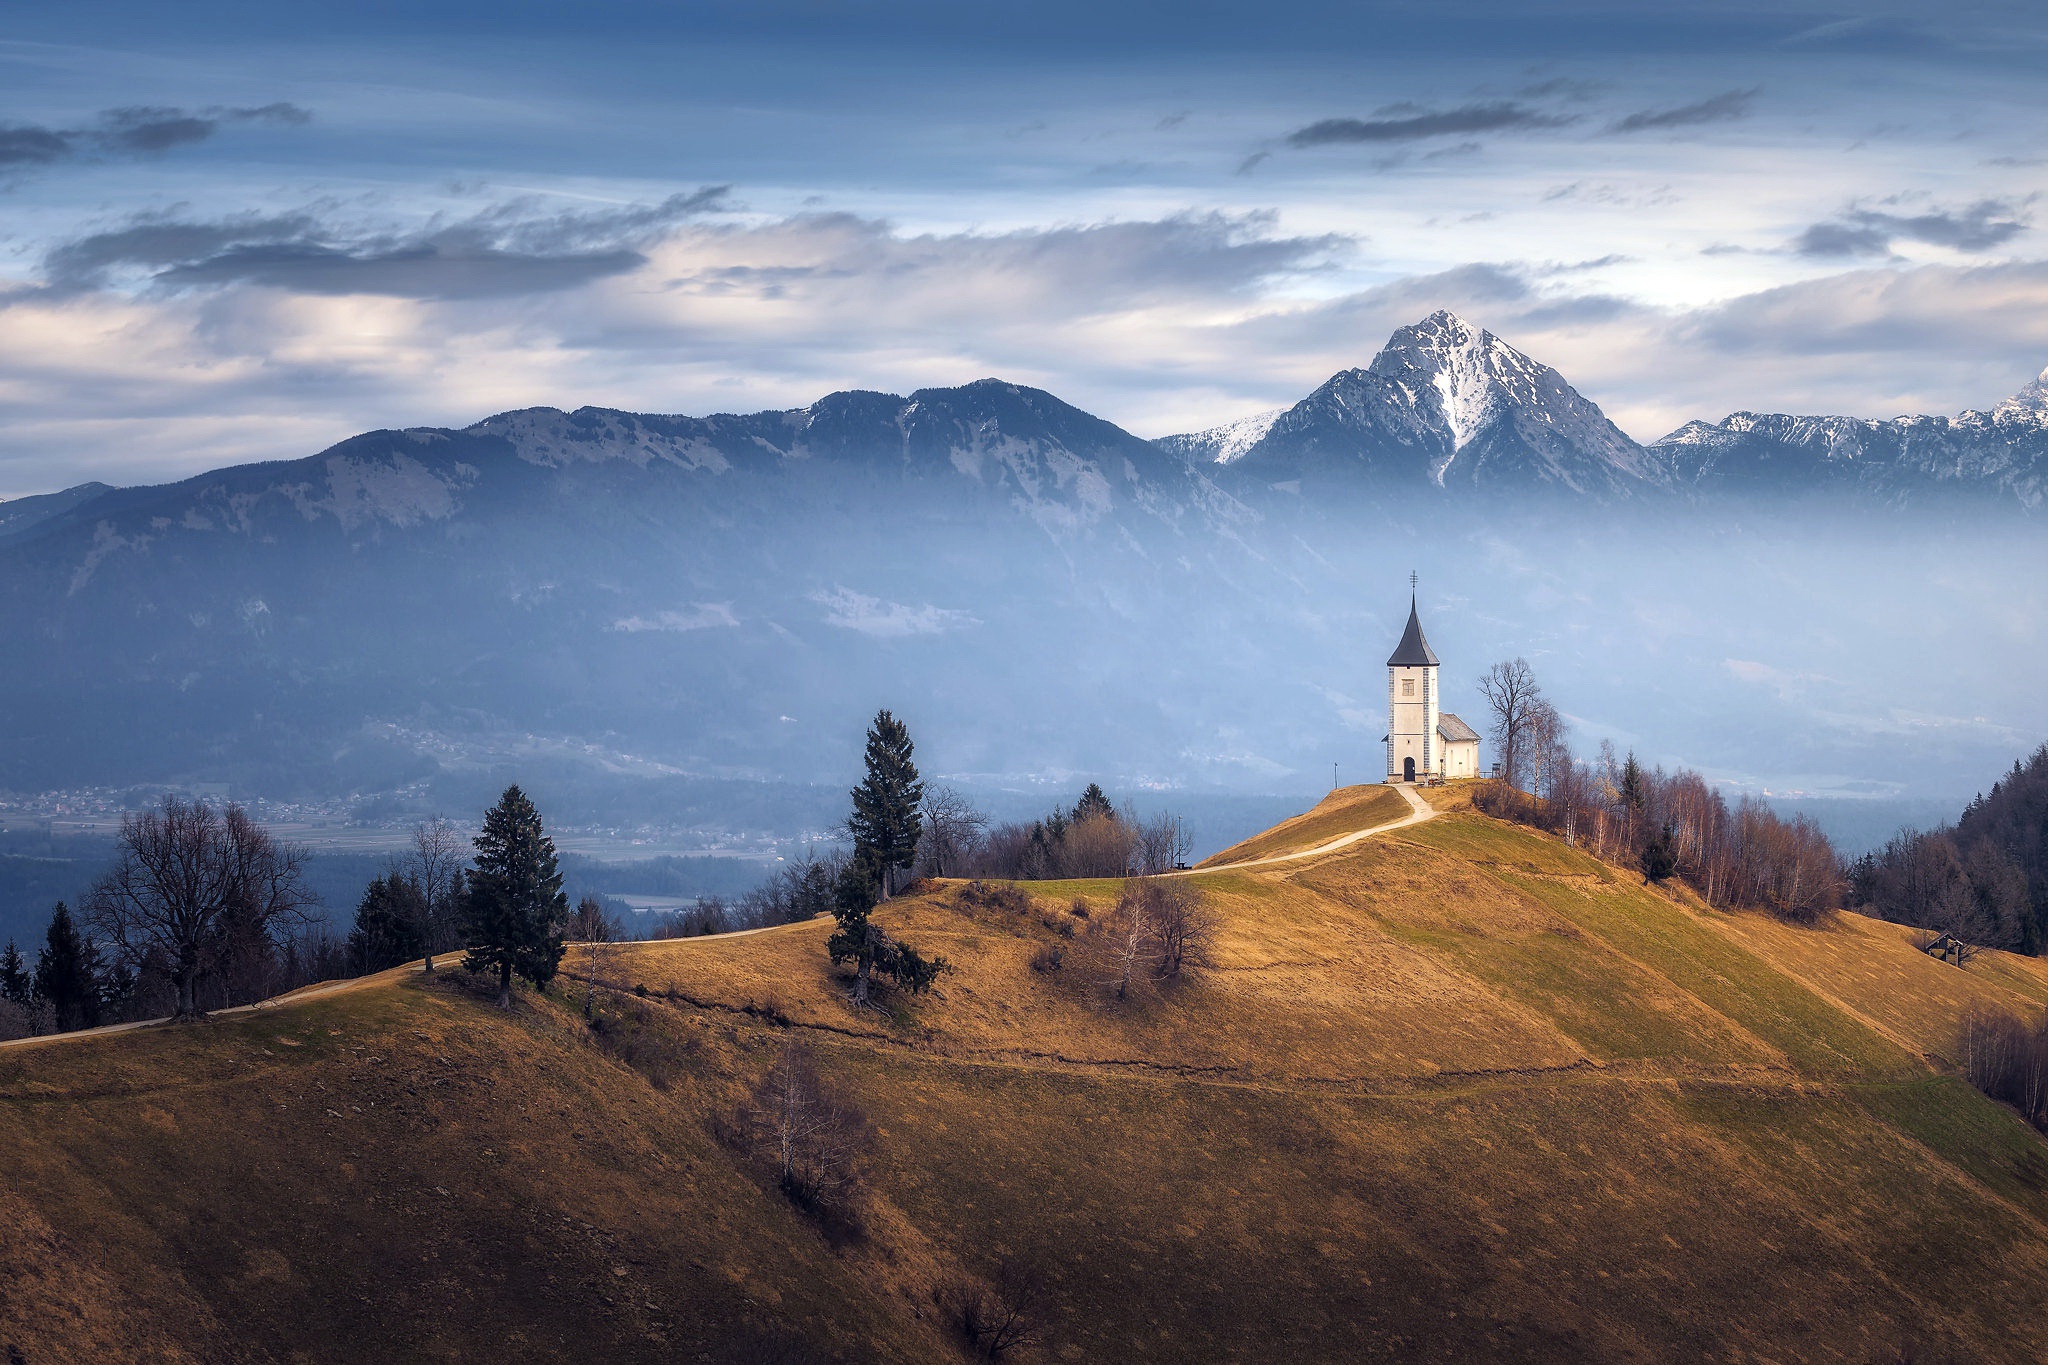 General 2048x1365 mountains nature fall landscape church